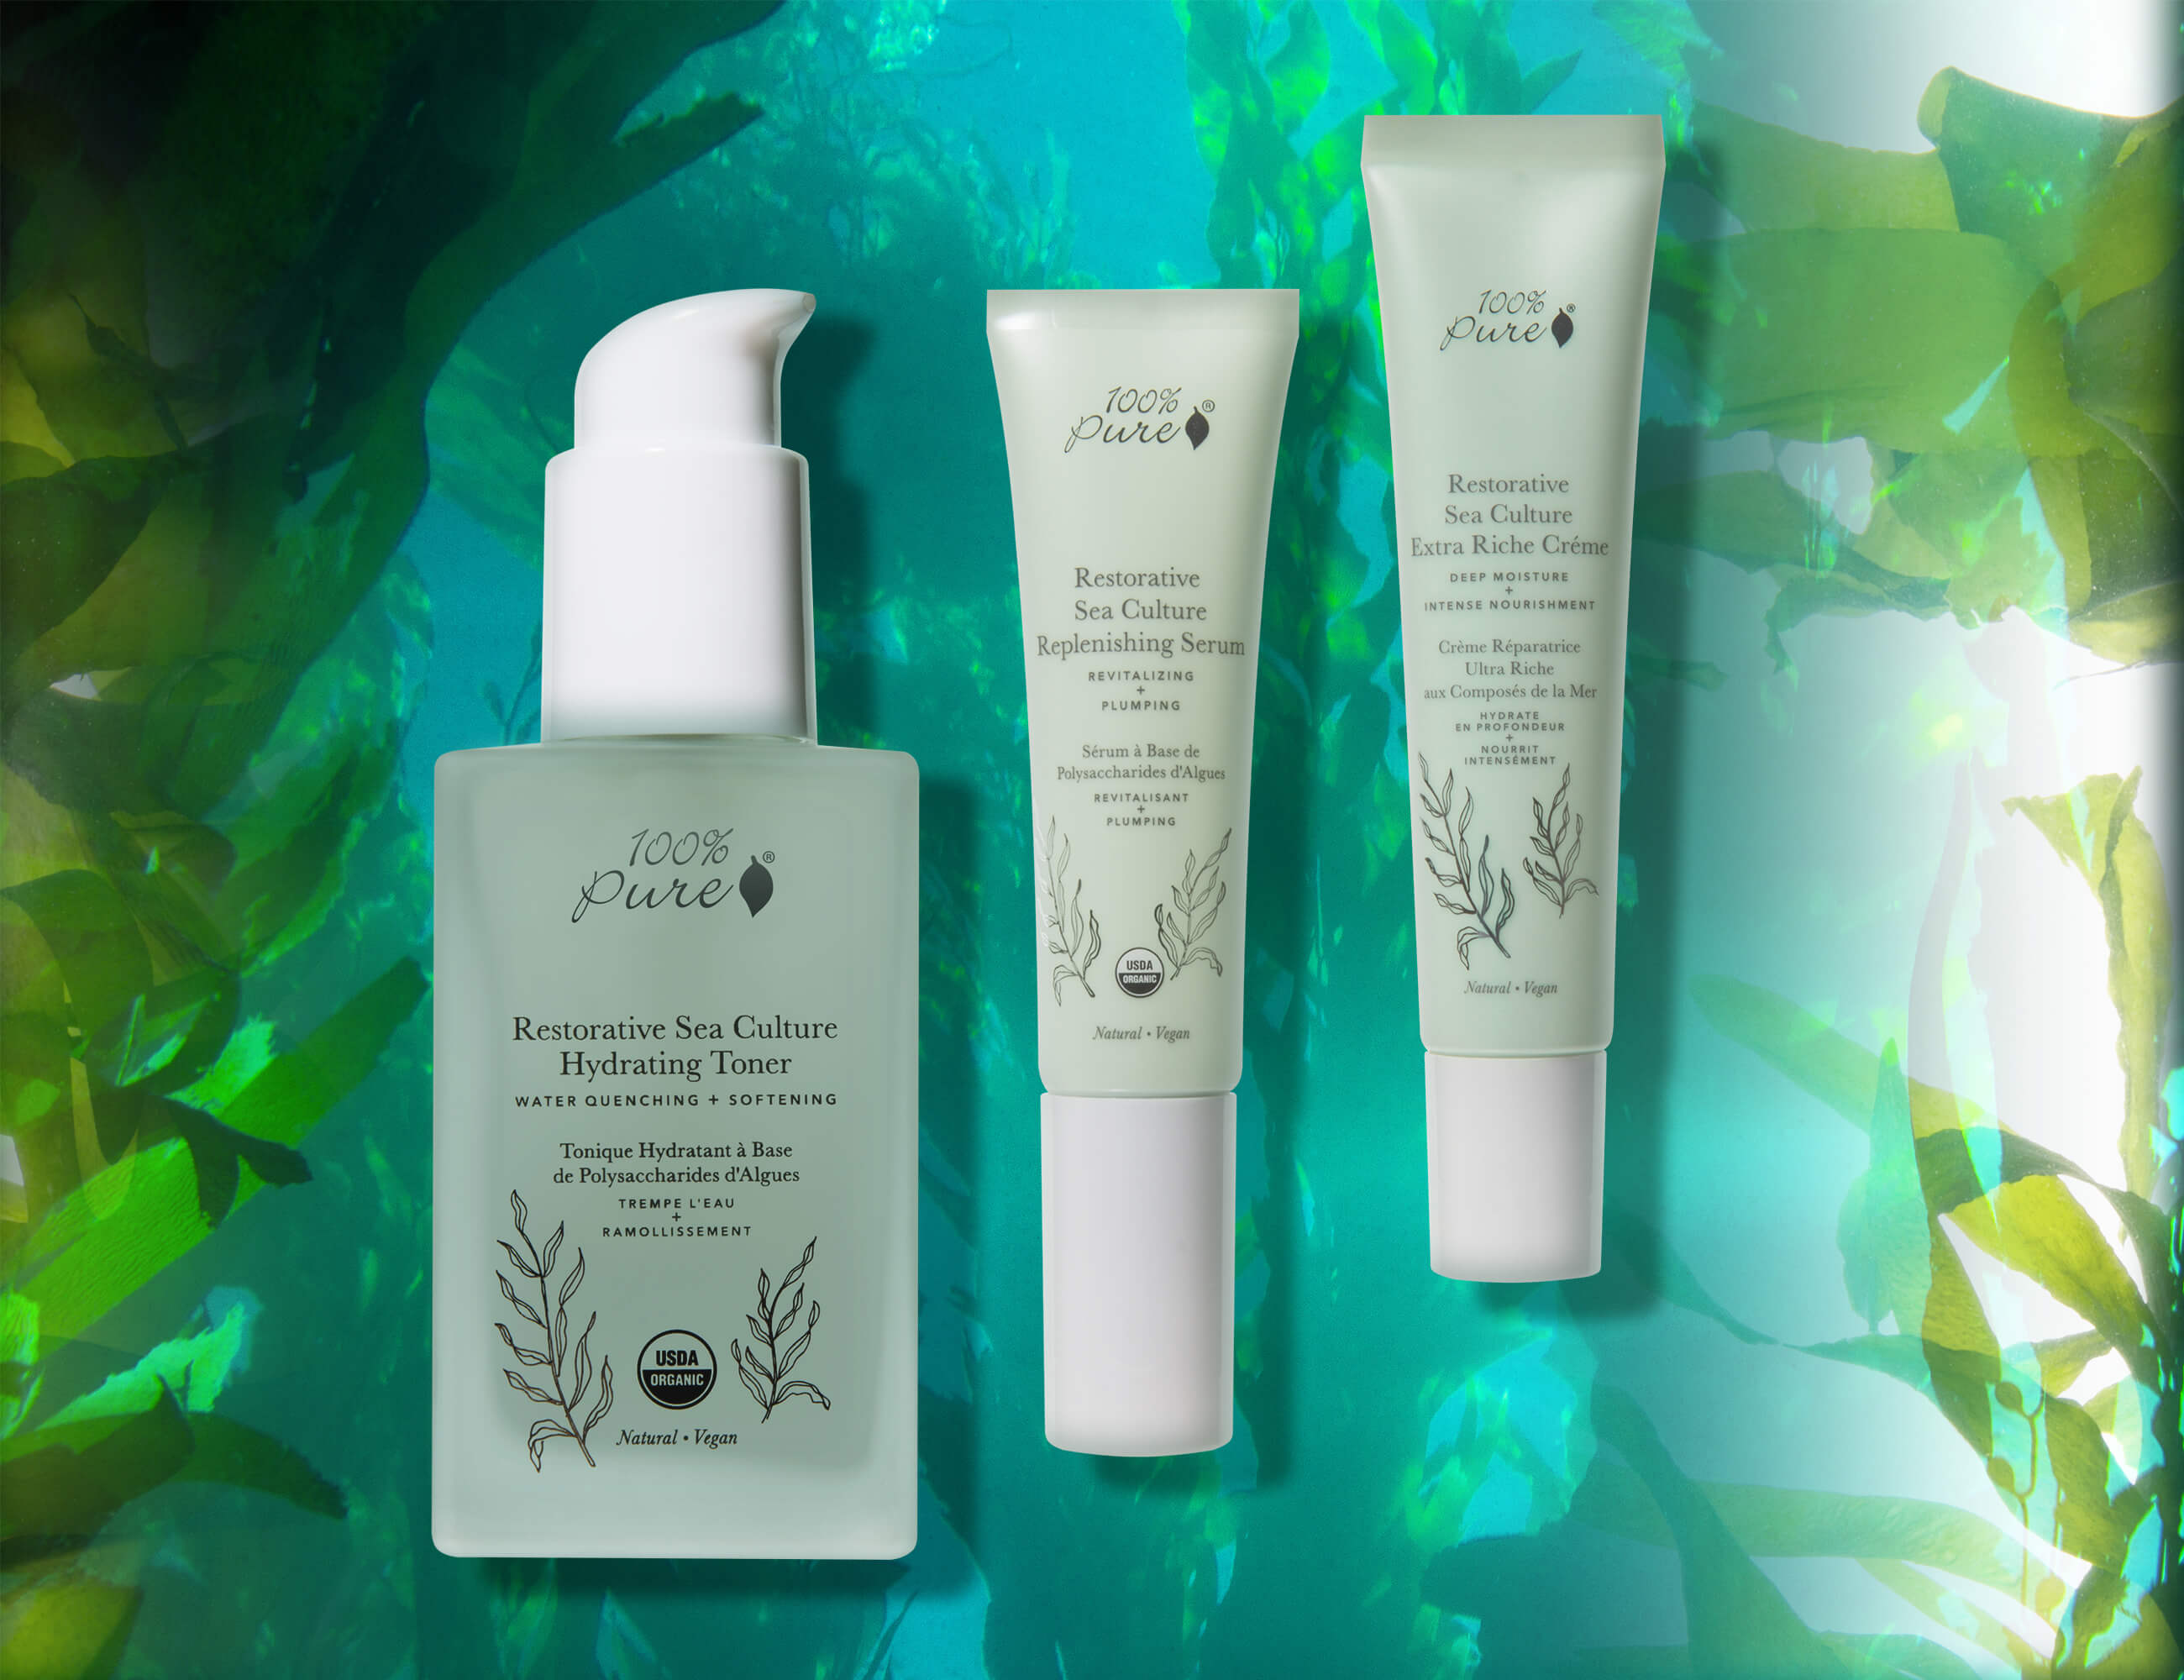 100% PURE Sea Culture Products